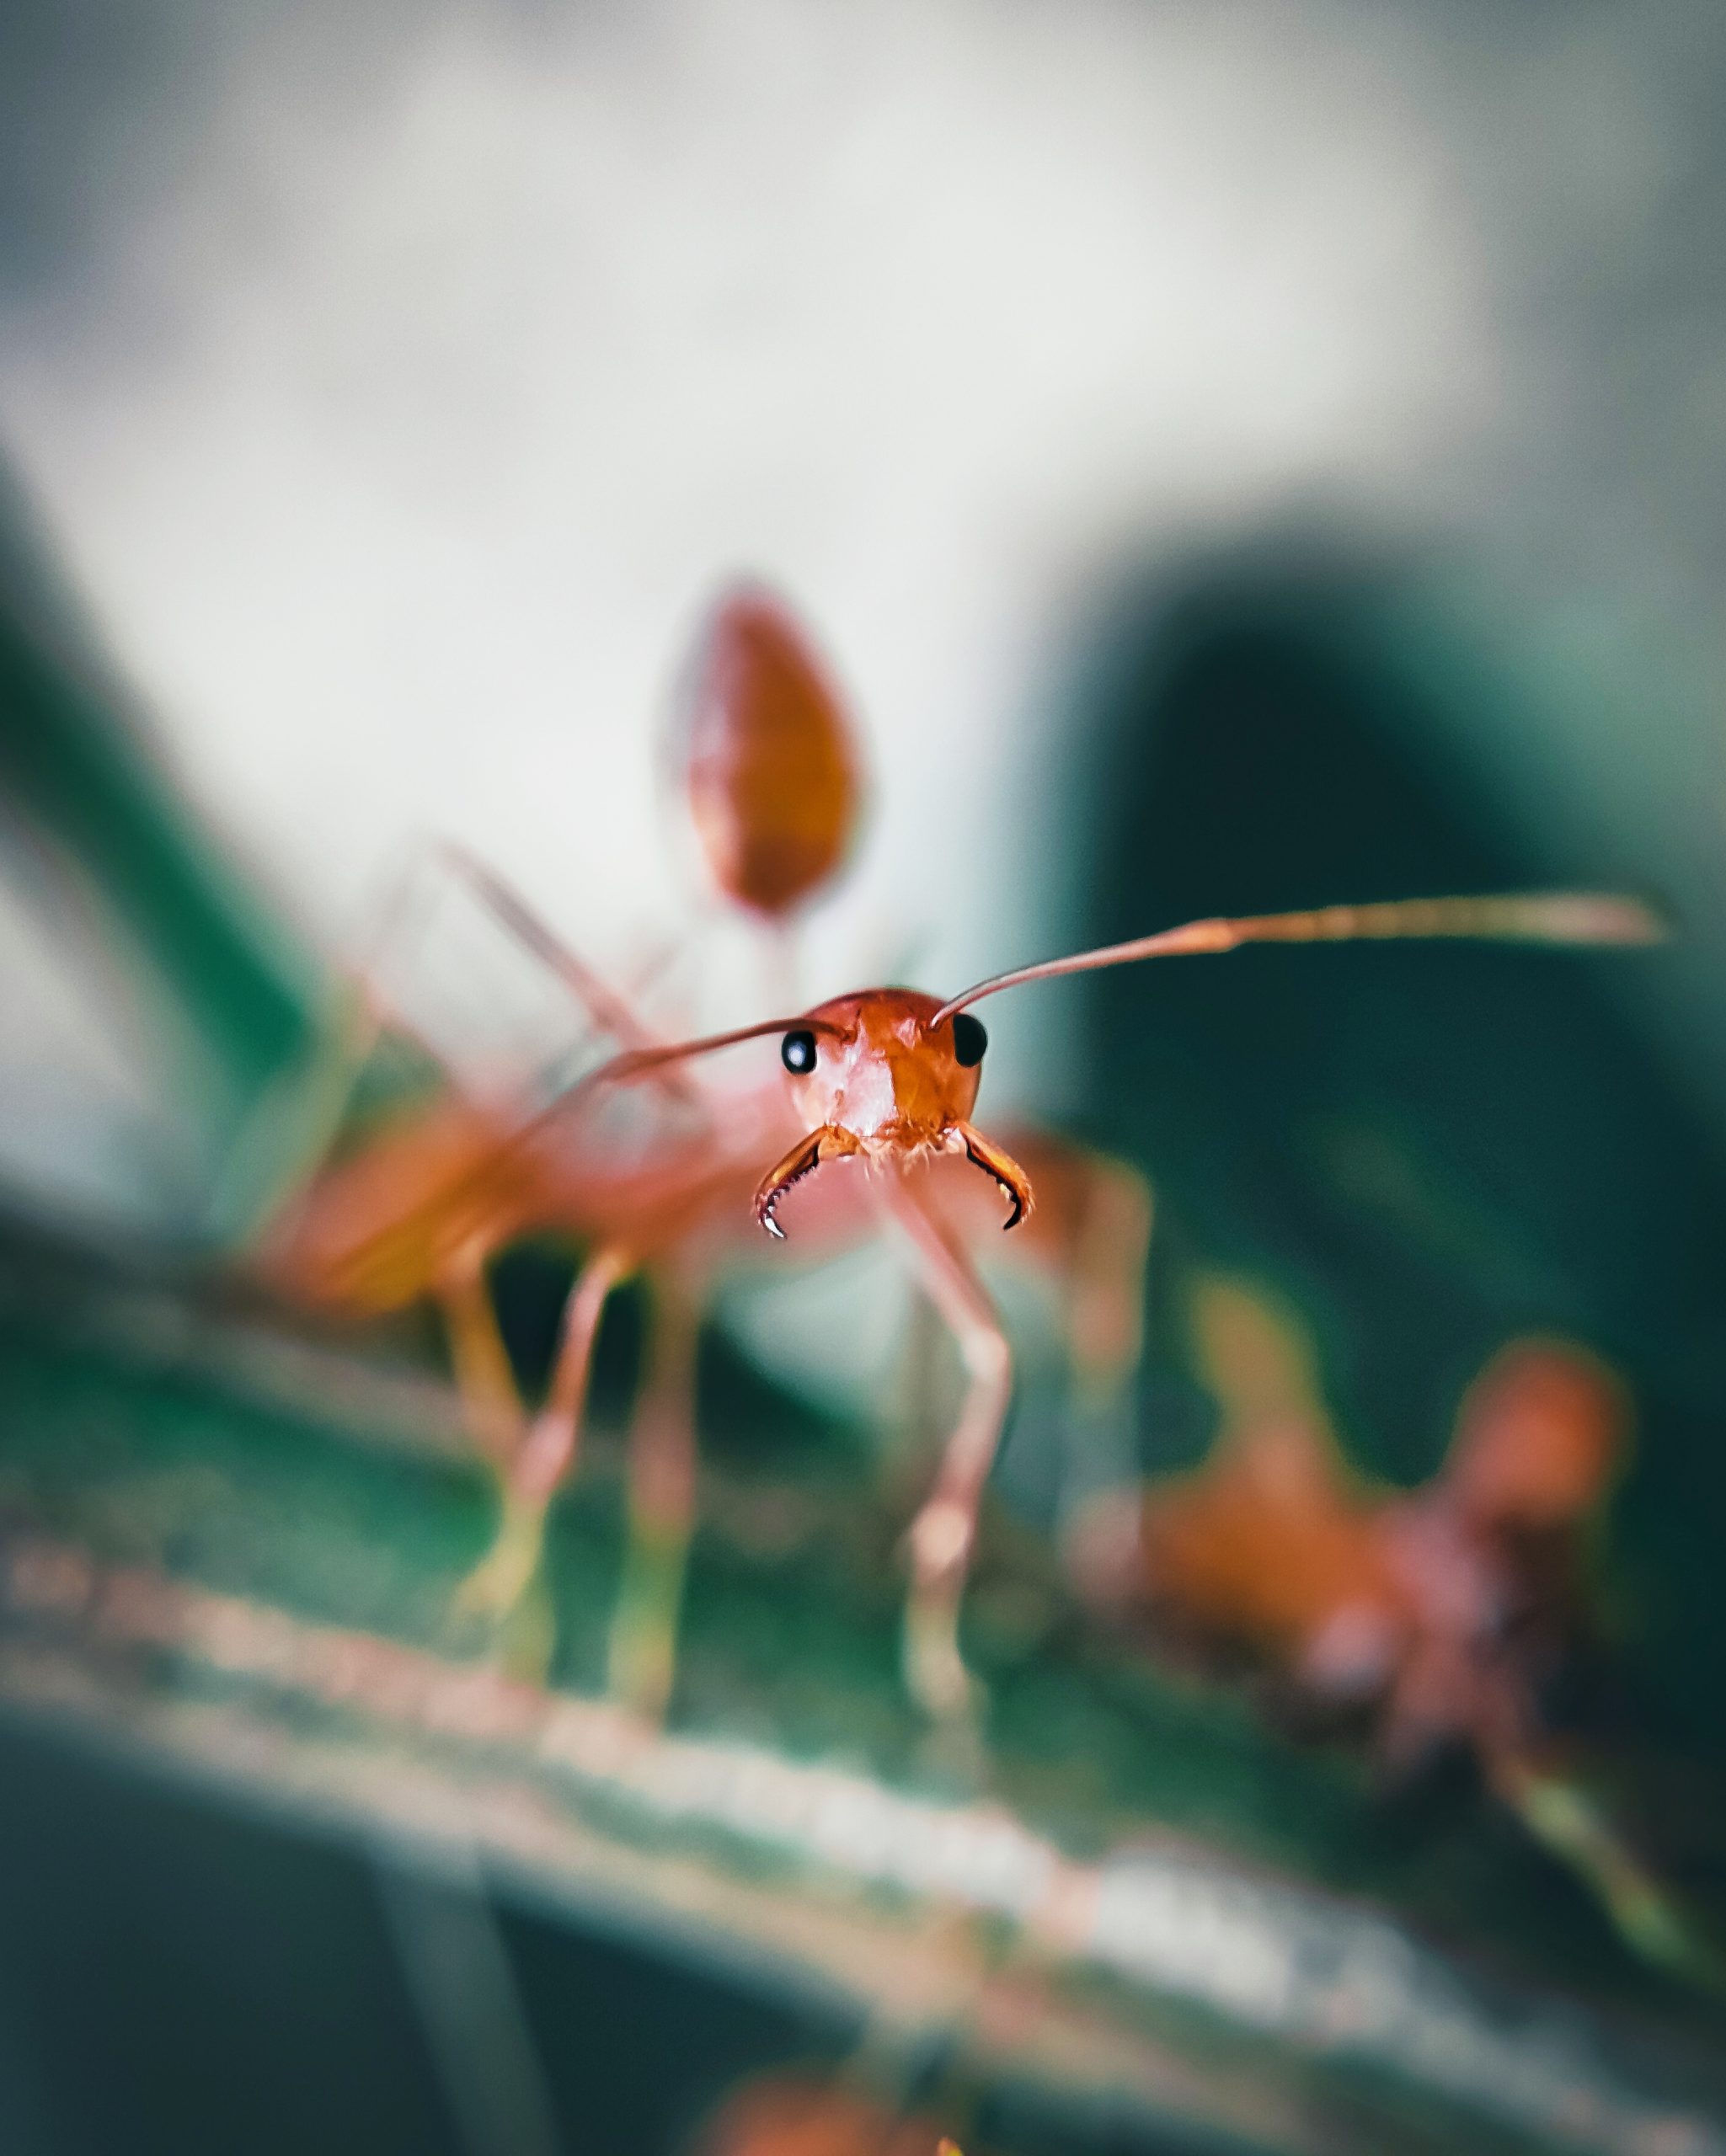 An ant macro view